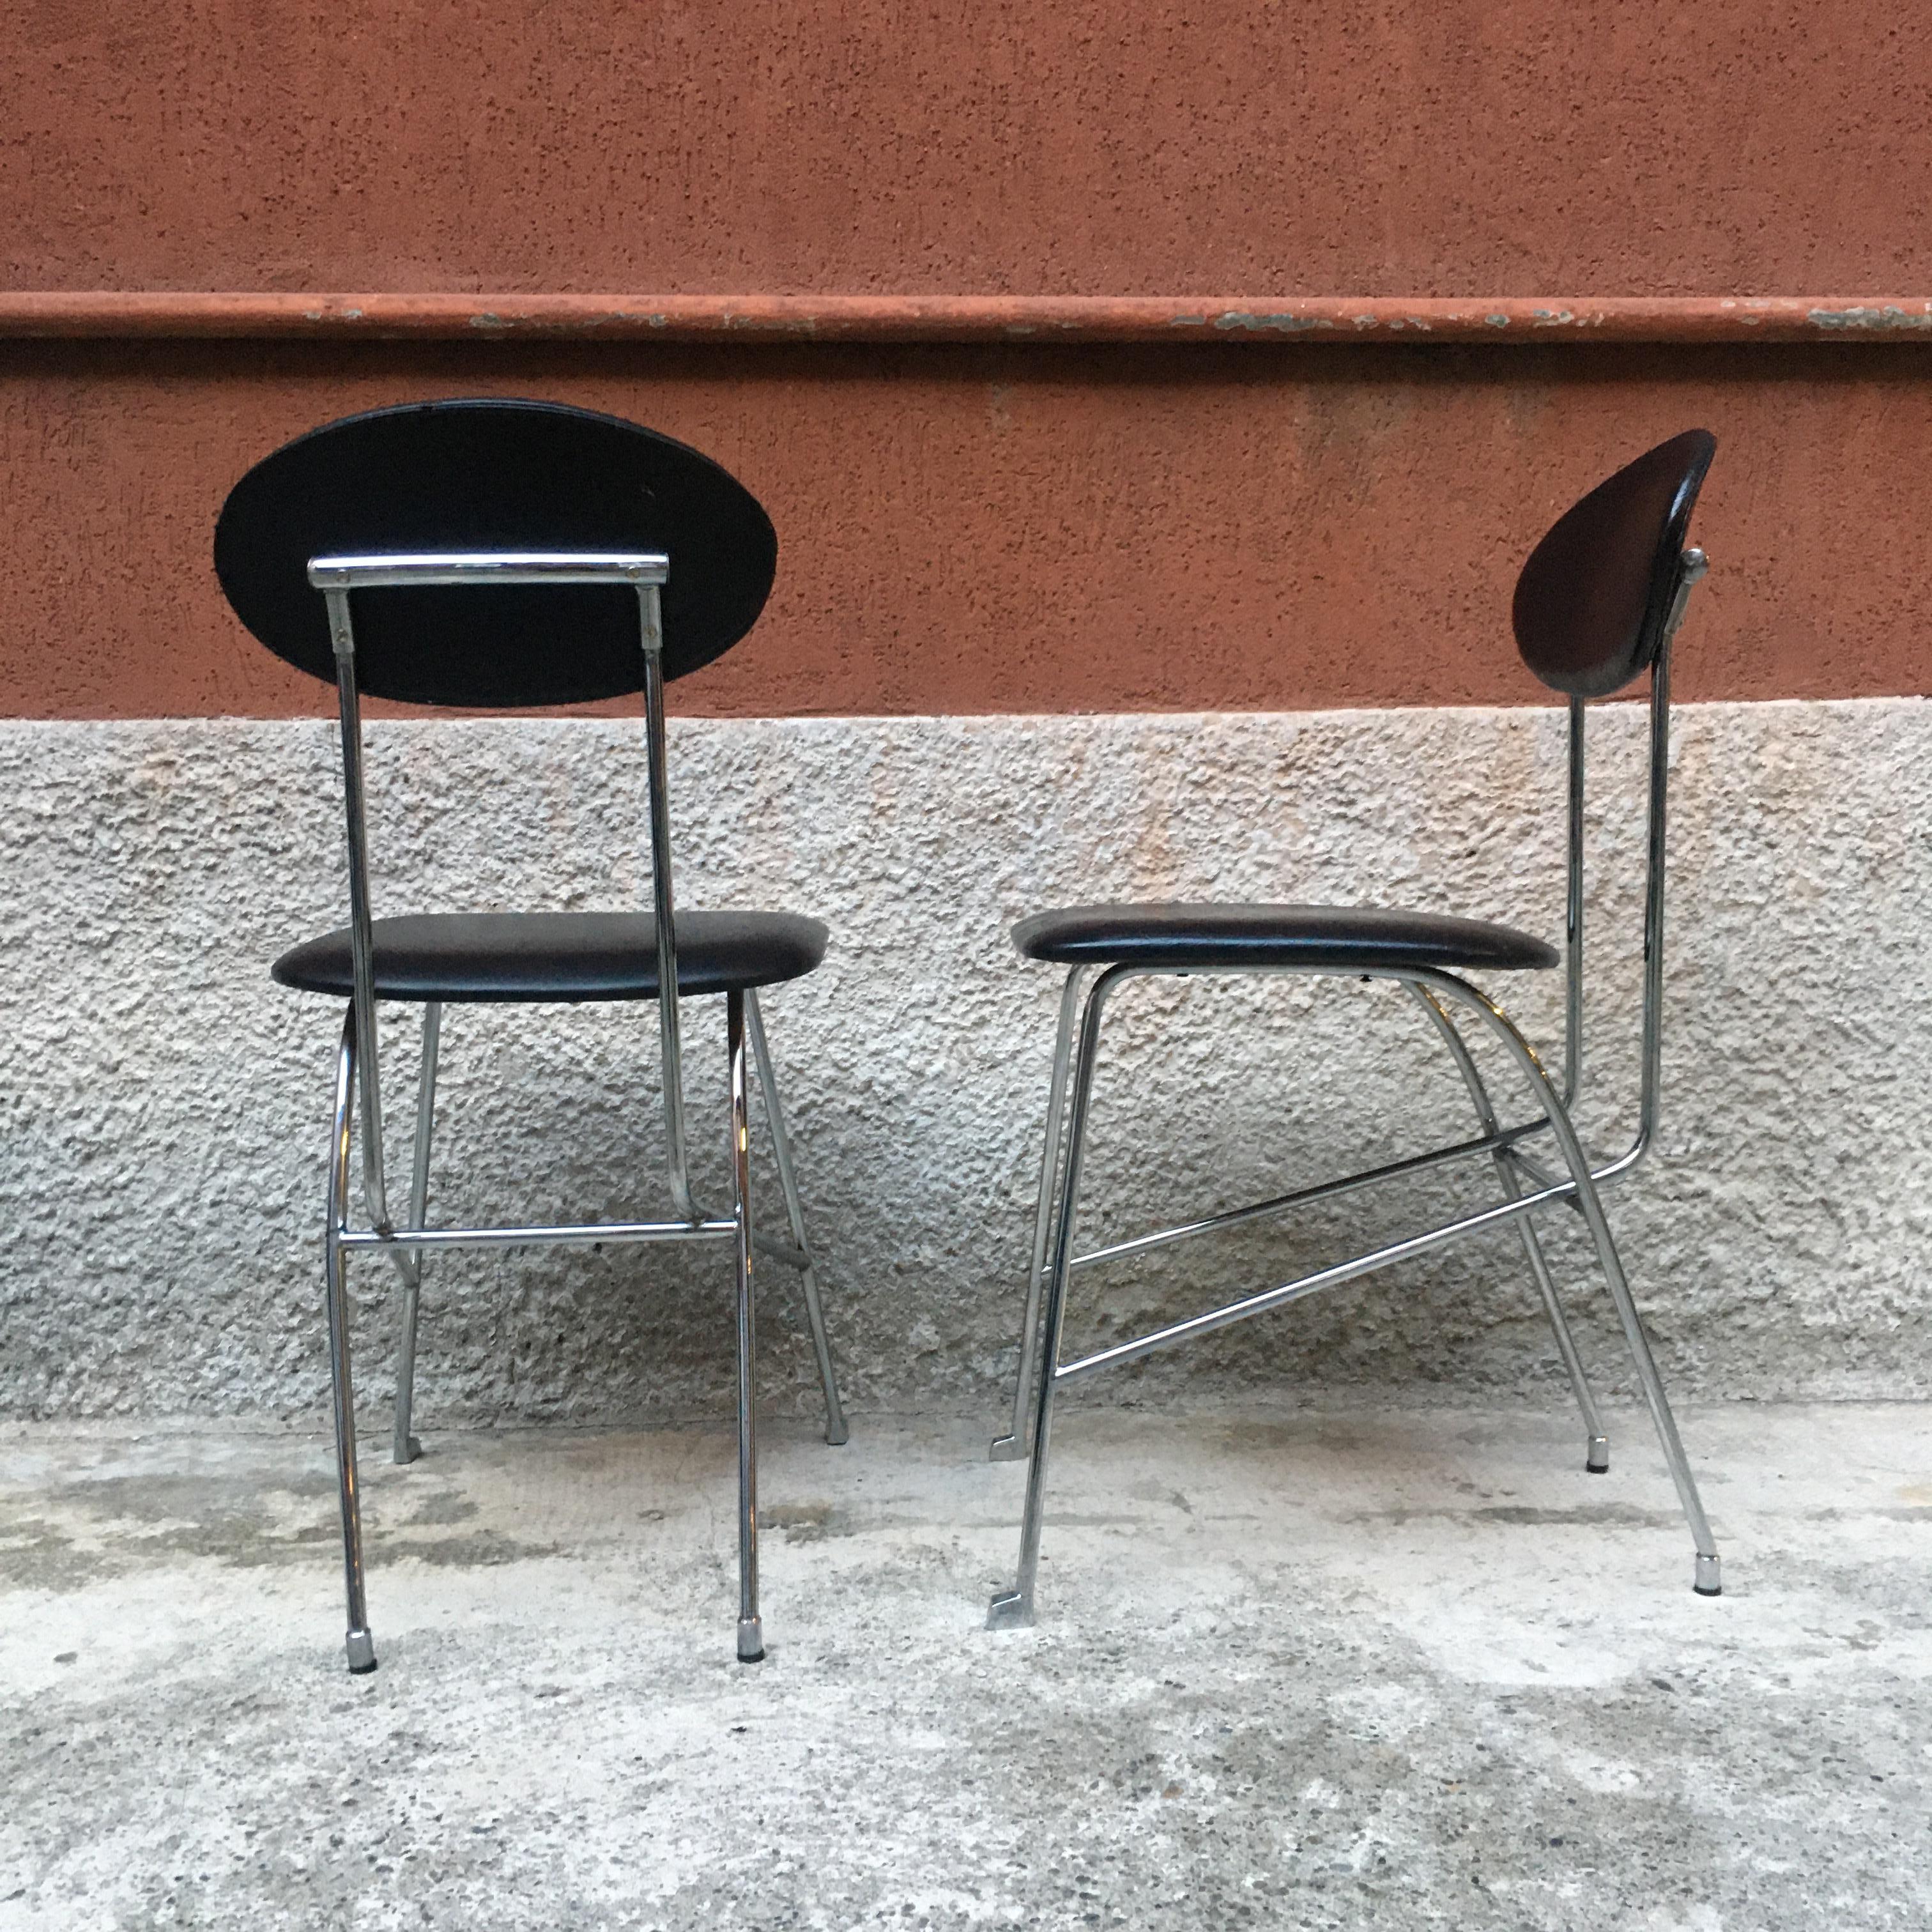 Late 20th Century Italian Chromed Metal Chairs with Leather Cover by Mendini for Zabro, 1980s